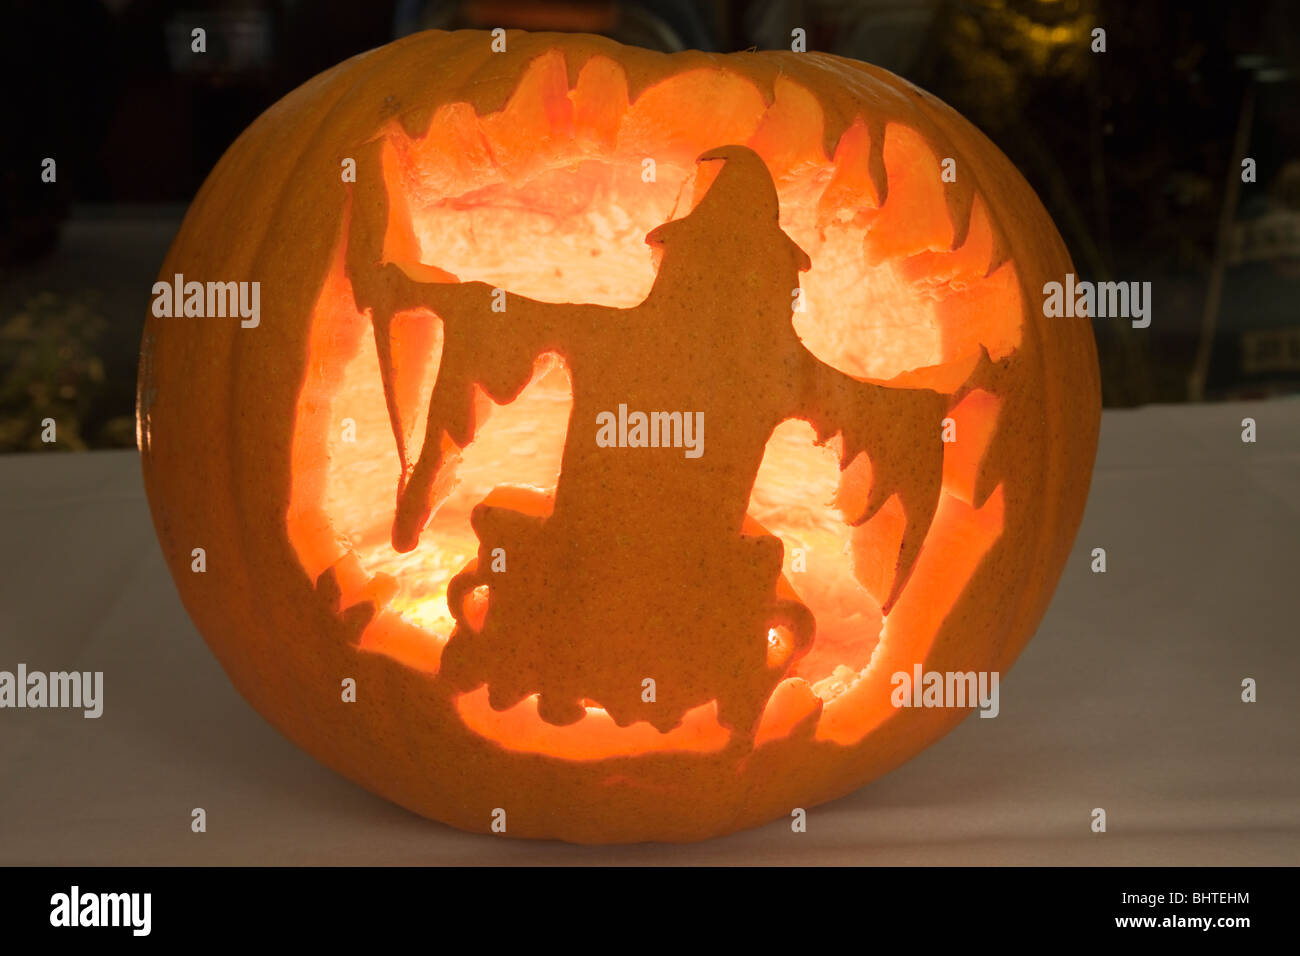 Scary Halloween pumpkin lantern with carved witch shape and illuminated with a candle glowing inside Stock Photo